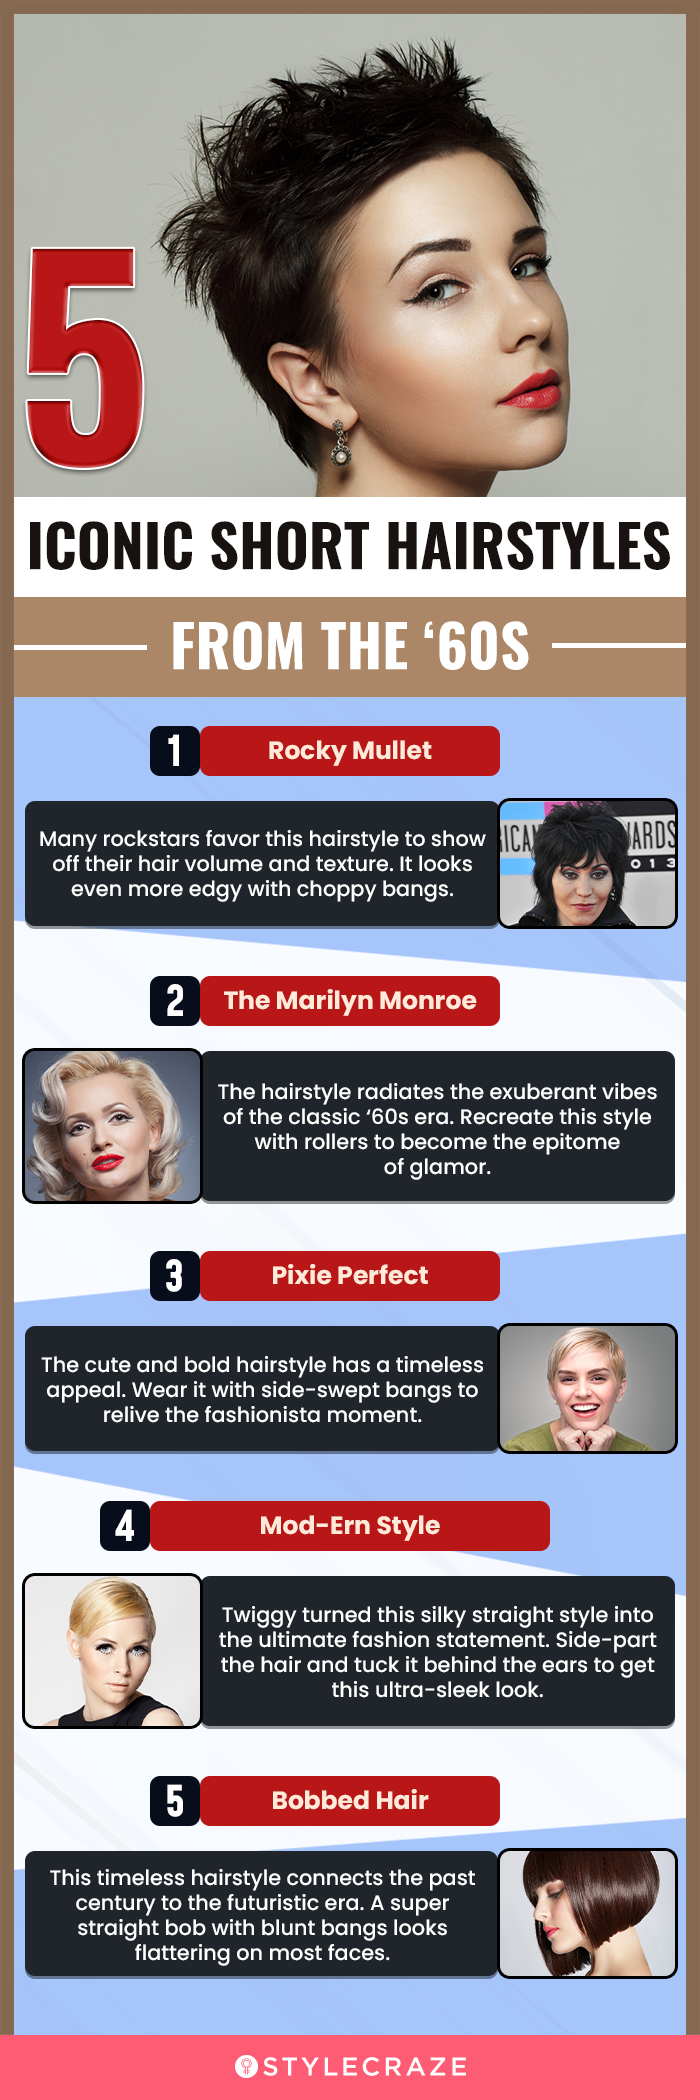 5 iconic short hairstyles from the ’60s (infographic)